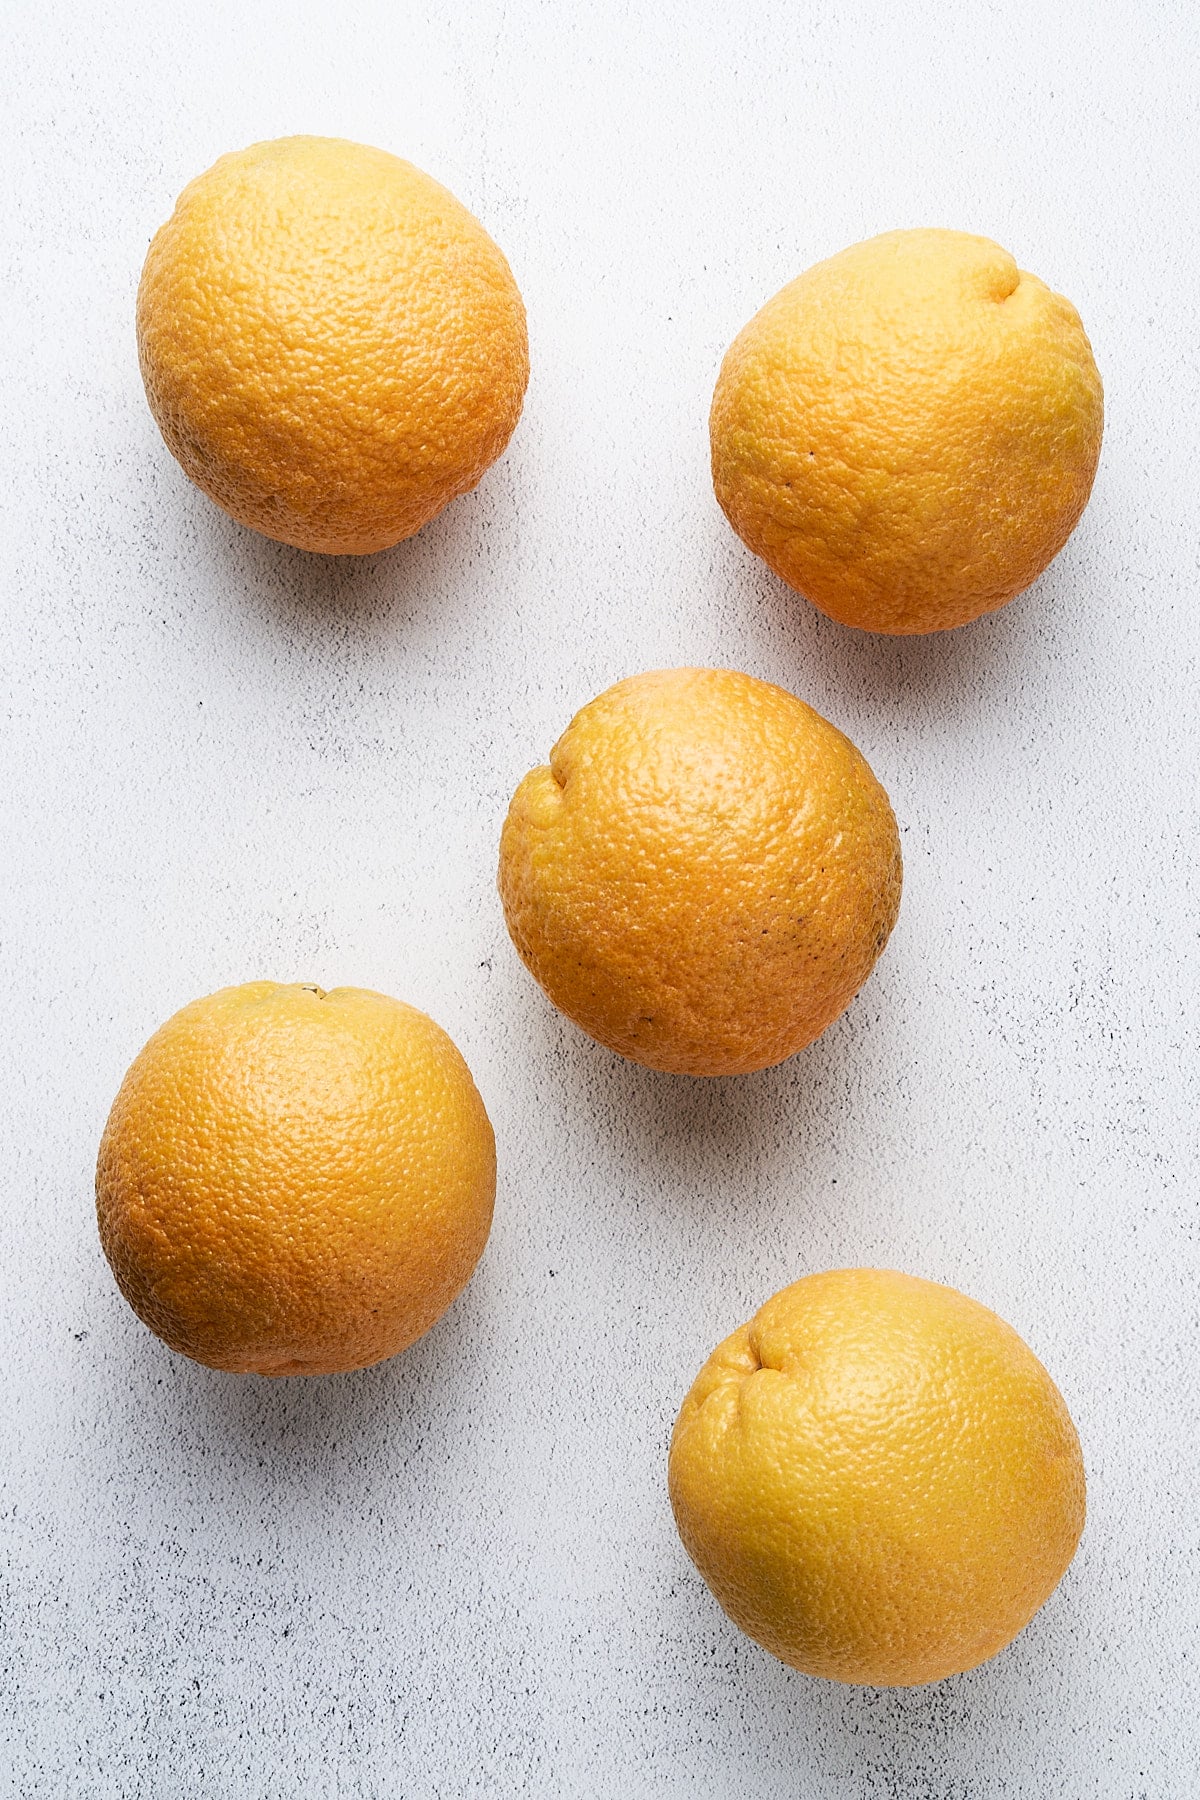 Oranges on a table.